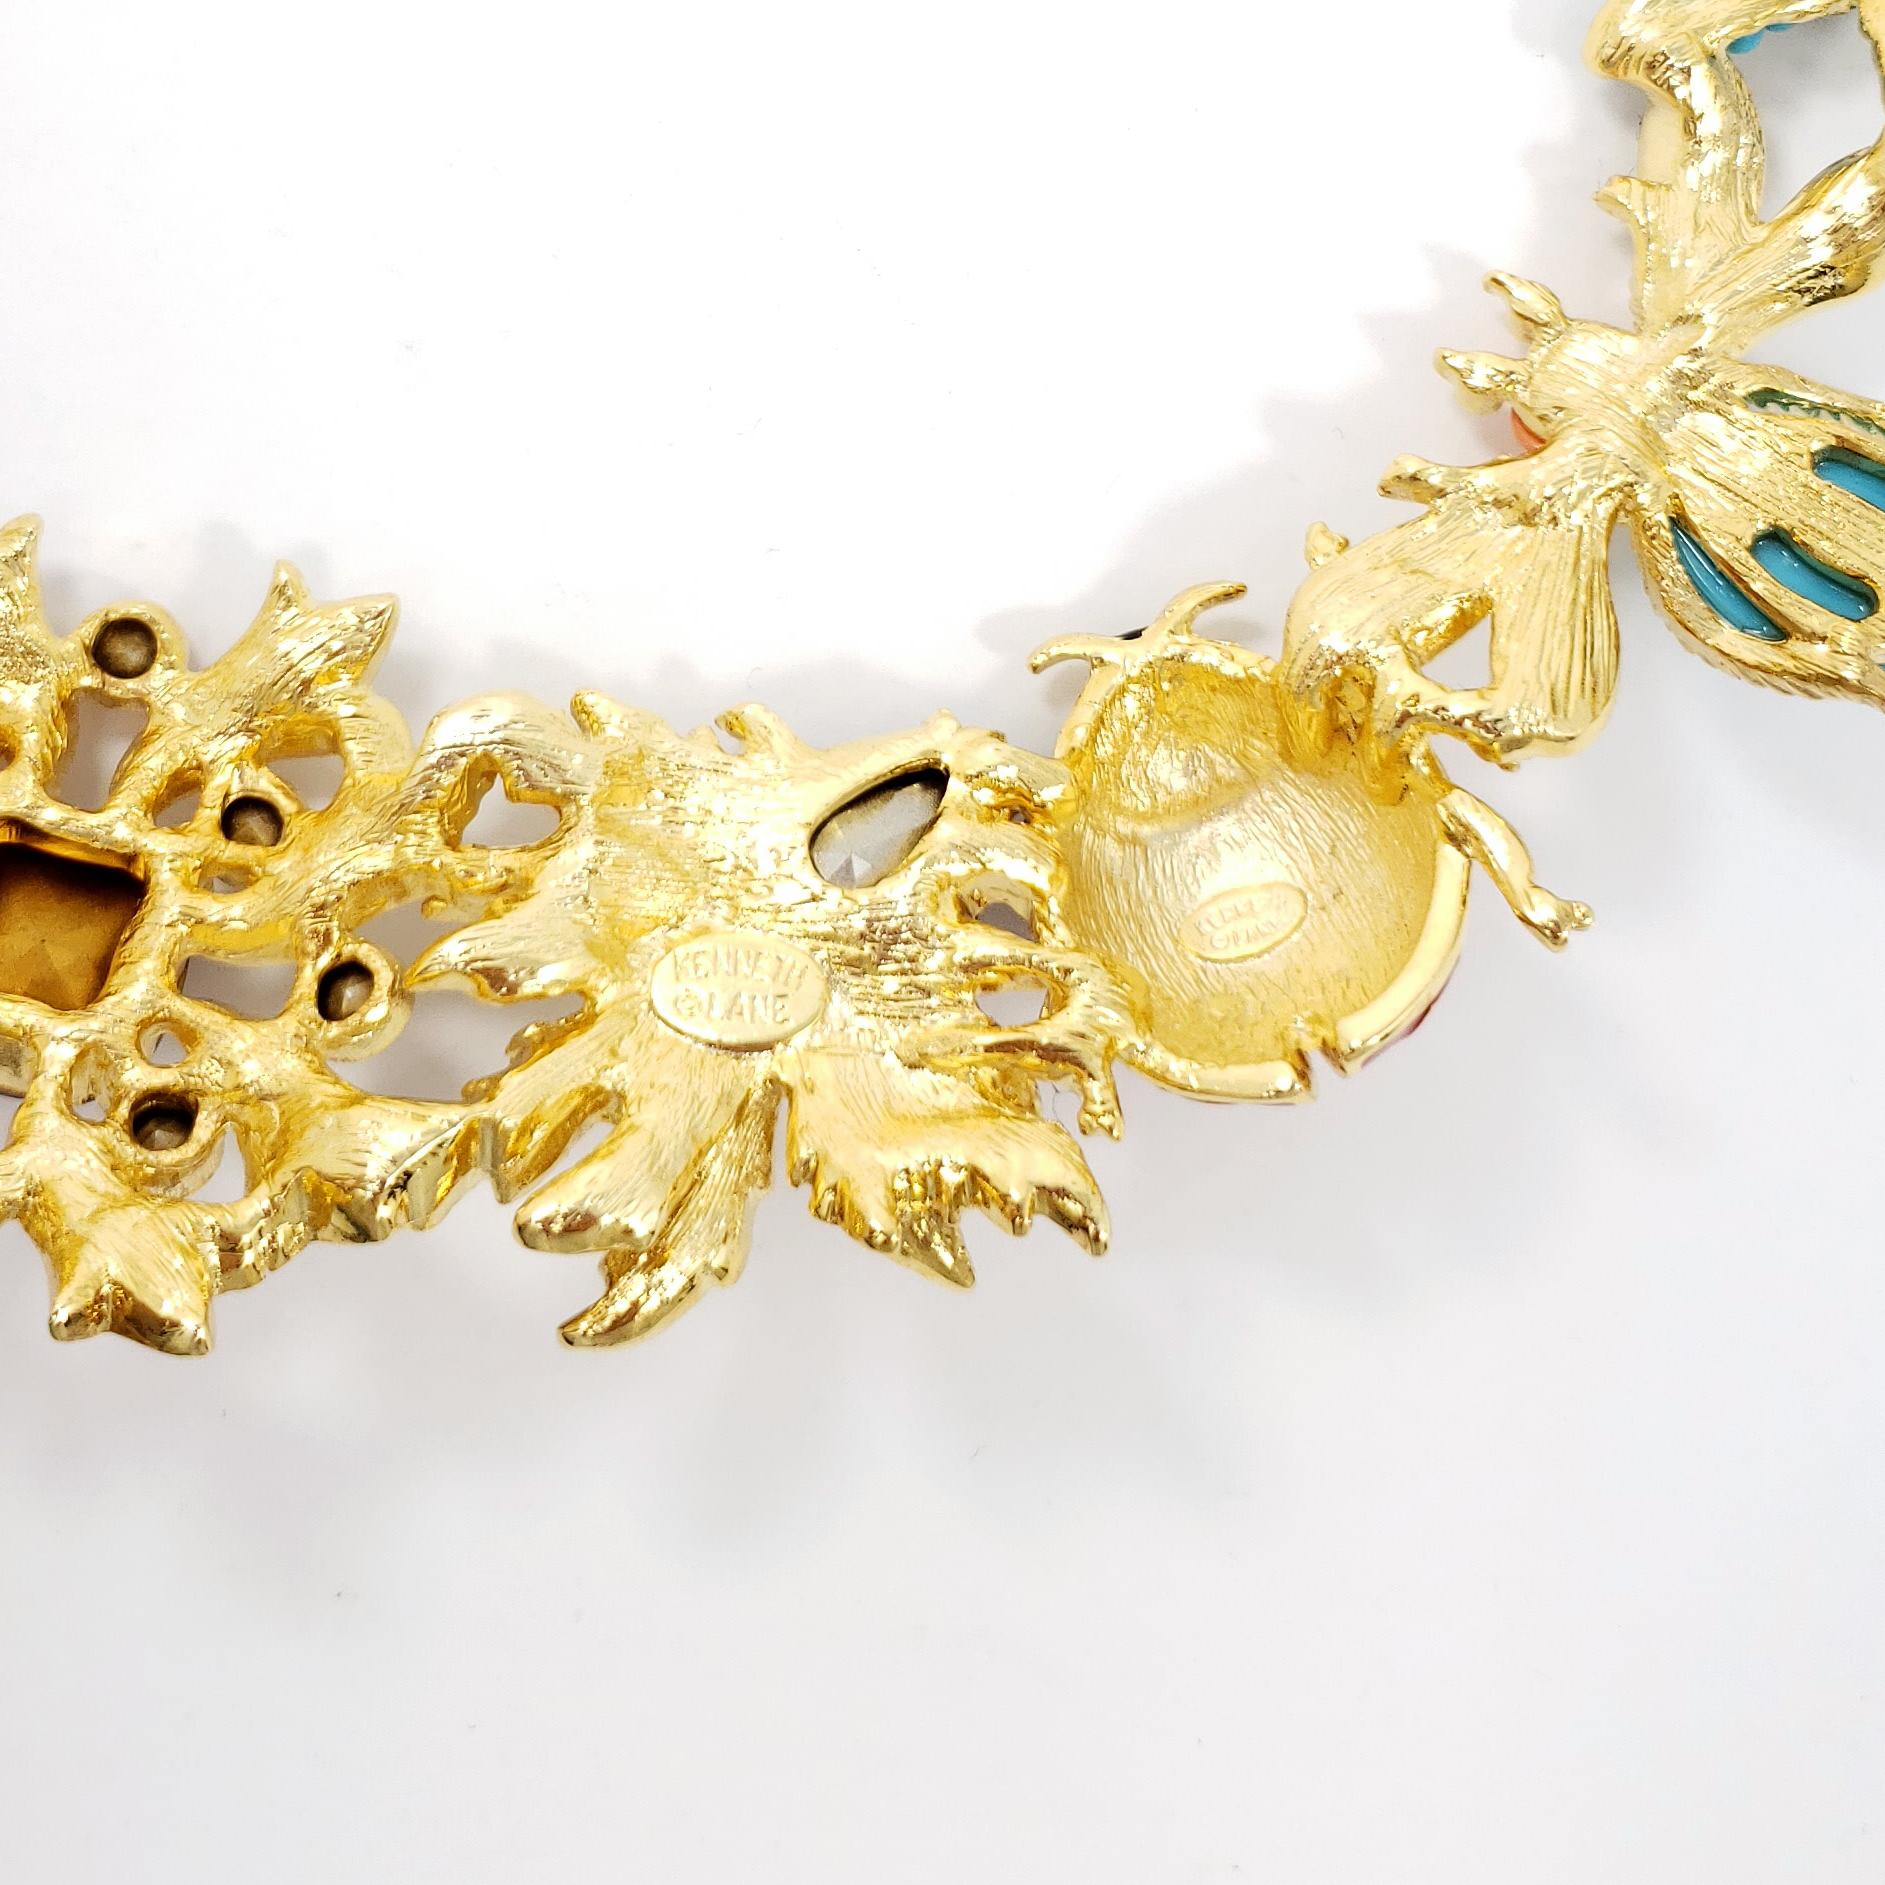 Contemporary Kenneth Jay Lane Golden Kaleidoscope Collar Necklace, Enamel and Crystal Motifs For Sale